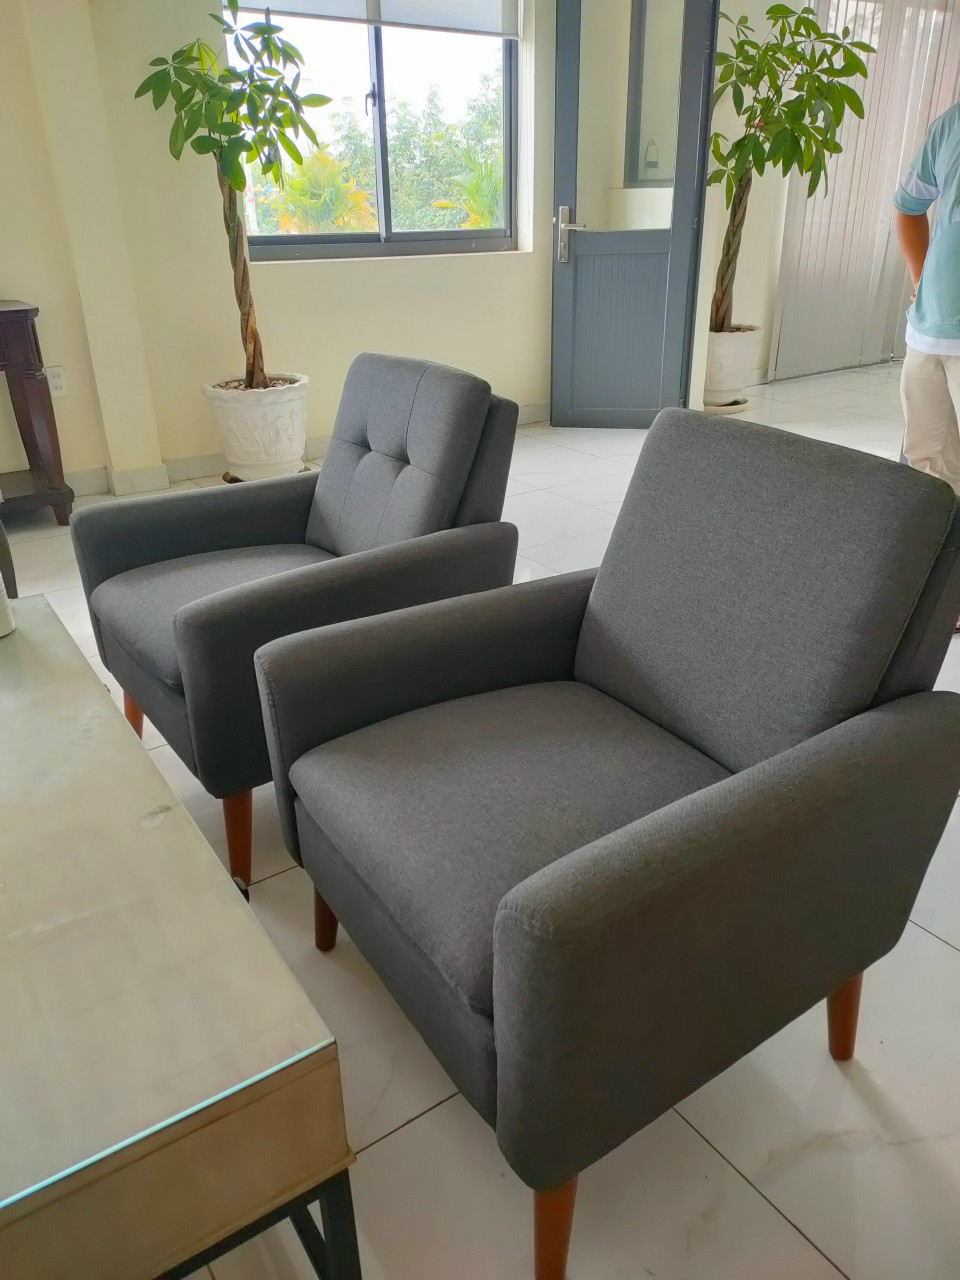 High Quality Elegent Lounge Chair New Arrival Design Graphic Best Brand Wholesaler Manufacturer Top Price Low MOQ